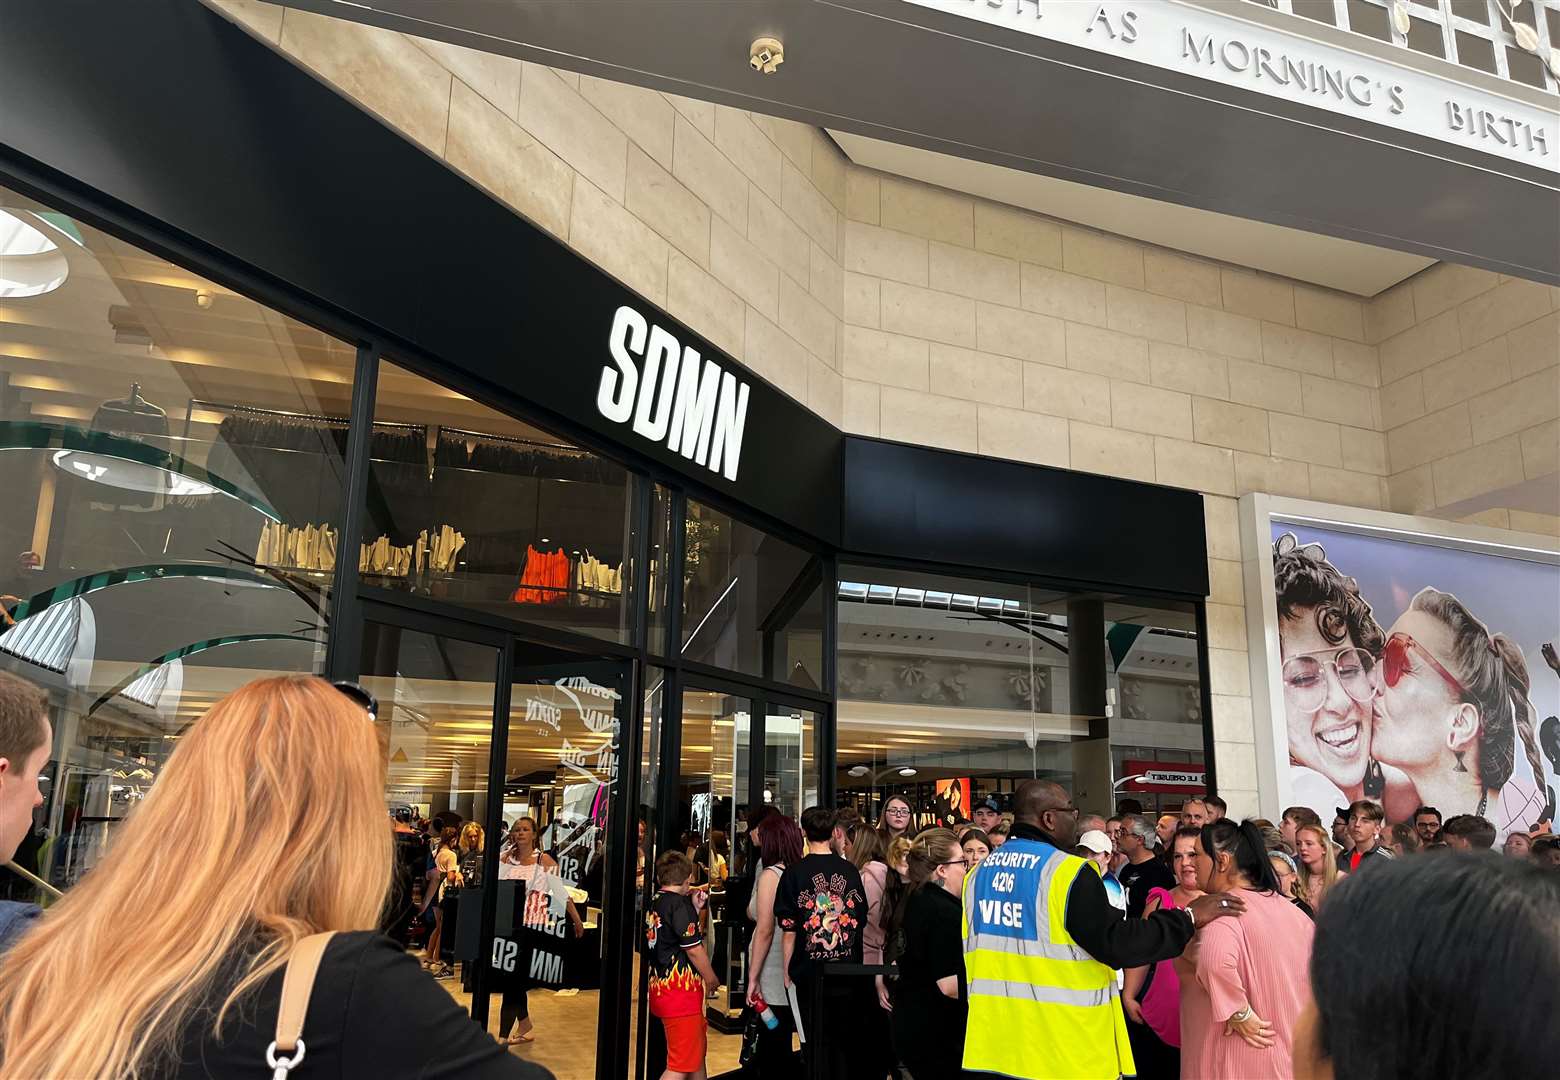 The opening of the first clothing store from YouTube sensations the Sidemen drew huge crowds to Bluewater.